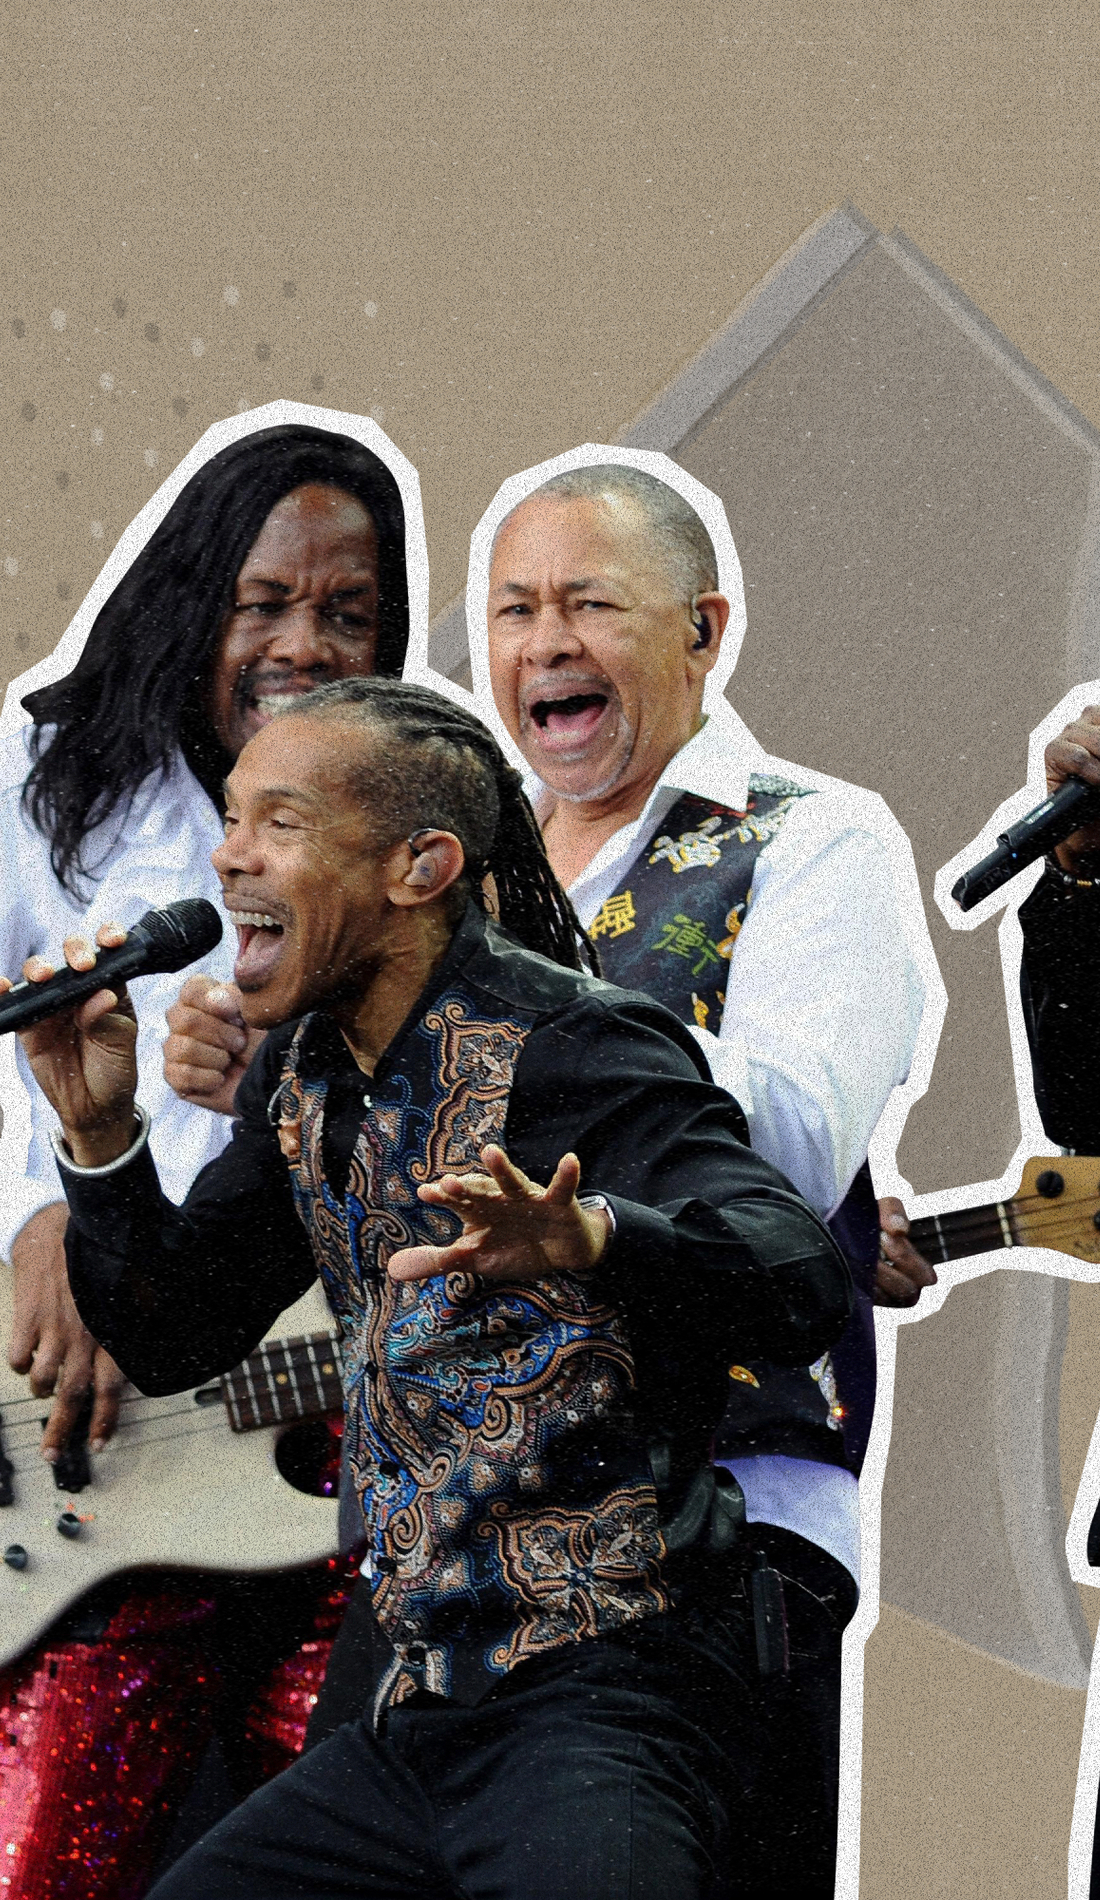 A Earth, Wind & Fire live event